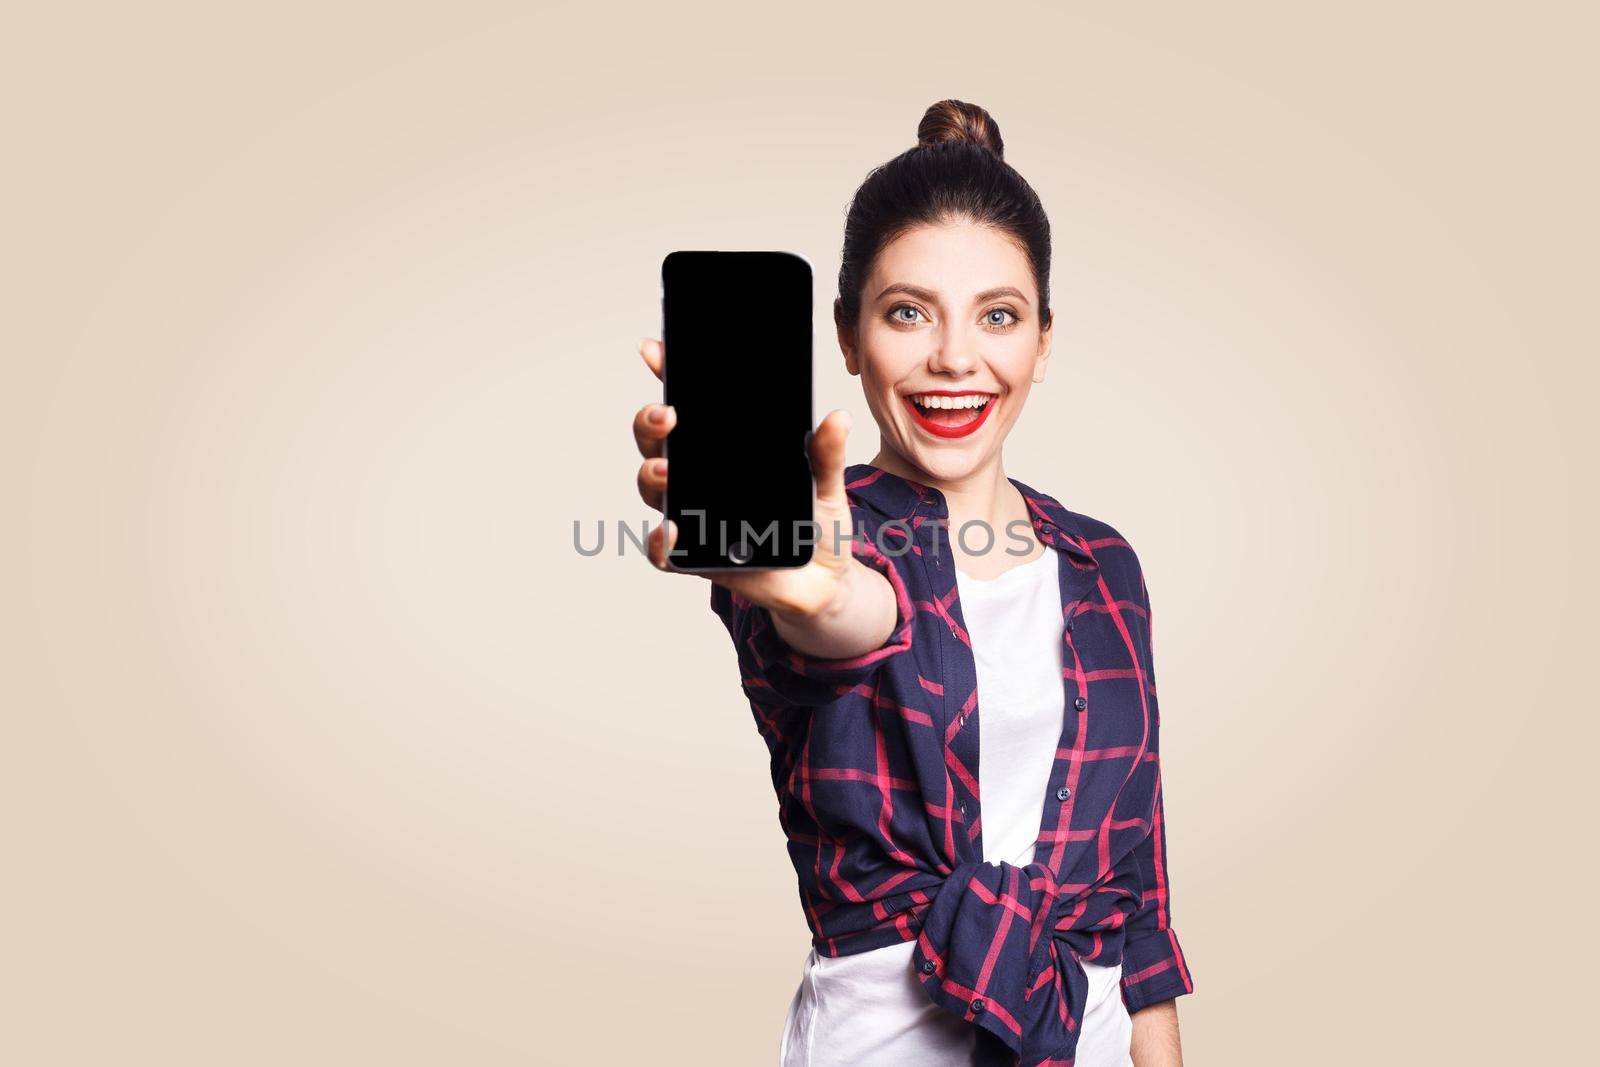 Young beautiful woman in casual style holding phone looking at camera and showing phone display. studio shot on beige background.